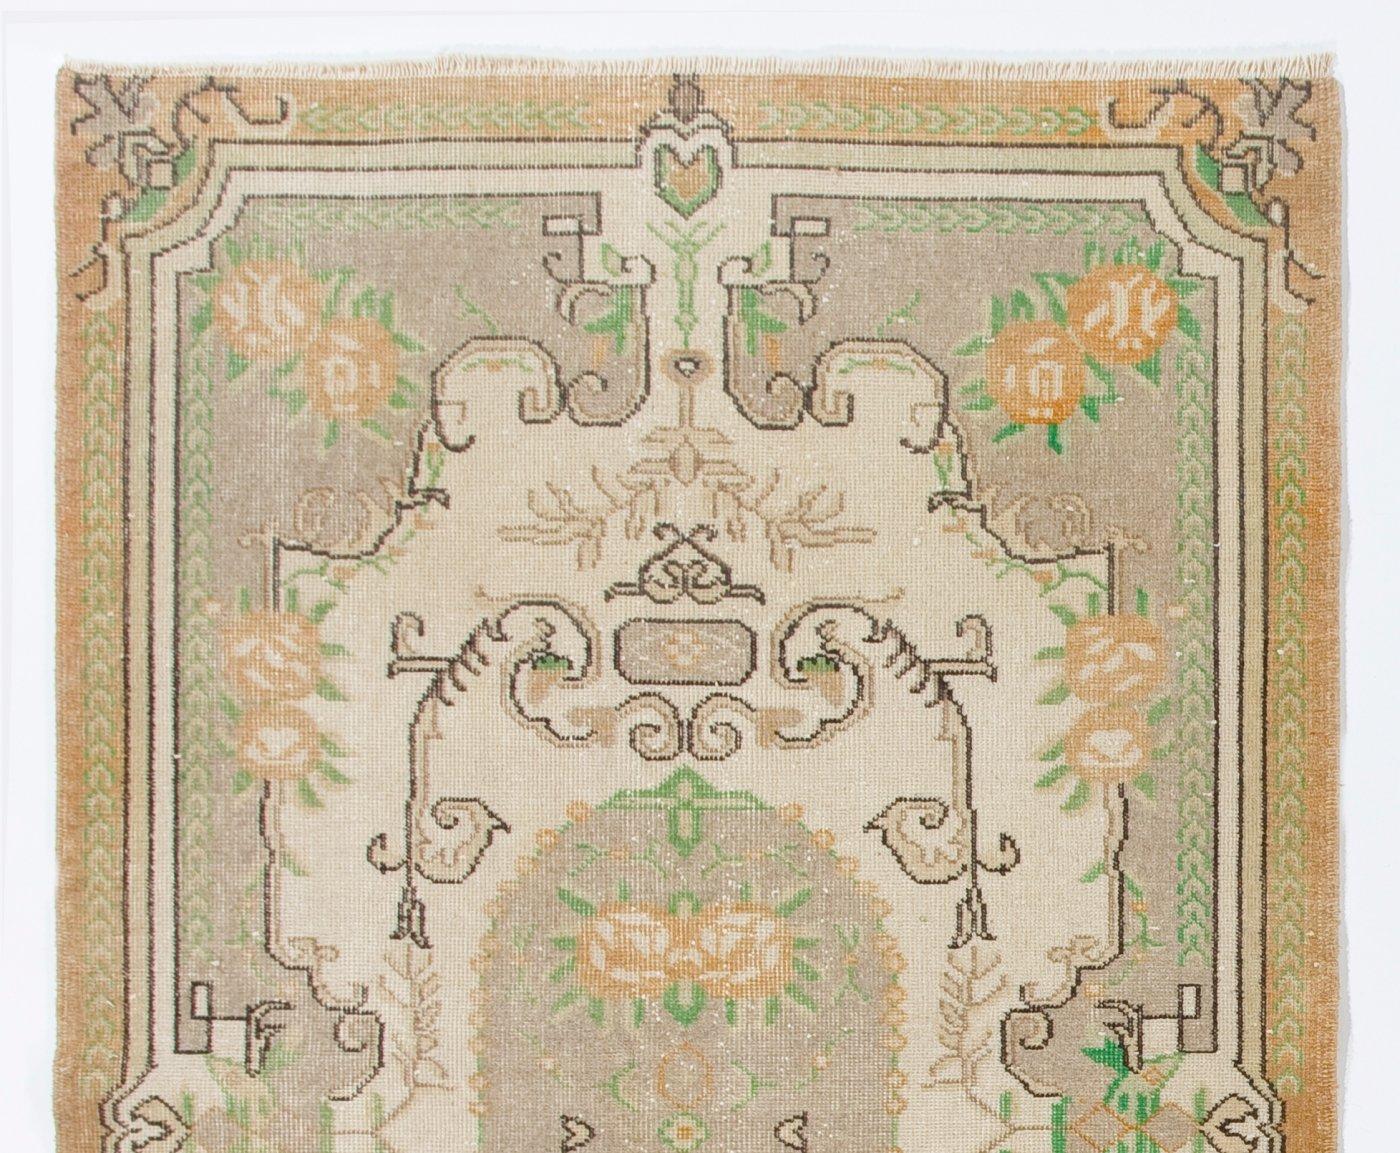 A finely hand-knotted vintage Turkish rug from the 1960s featuring an French-Aubusson inspired romantic floral design in ivory, light taupe gray and faded orange and fern green.

The rug has evenly low wool pile on cotton foundation. It is heavy and